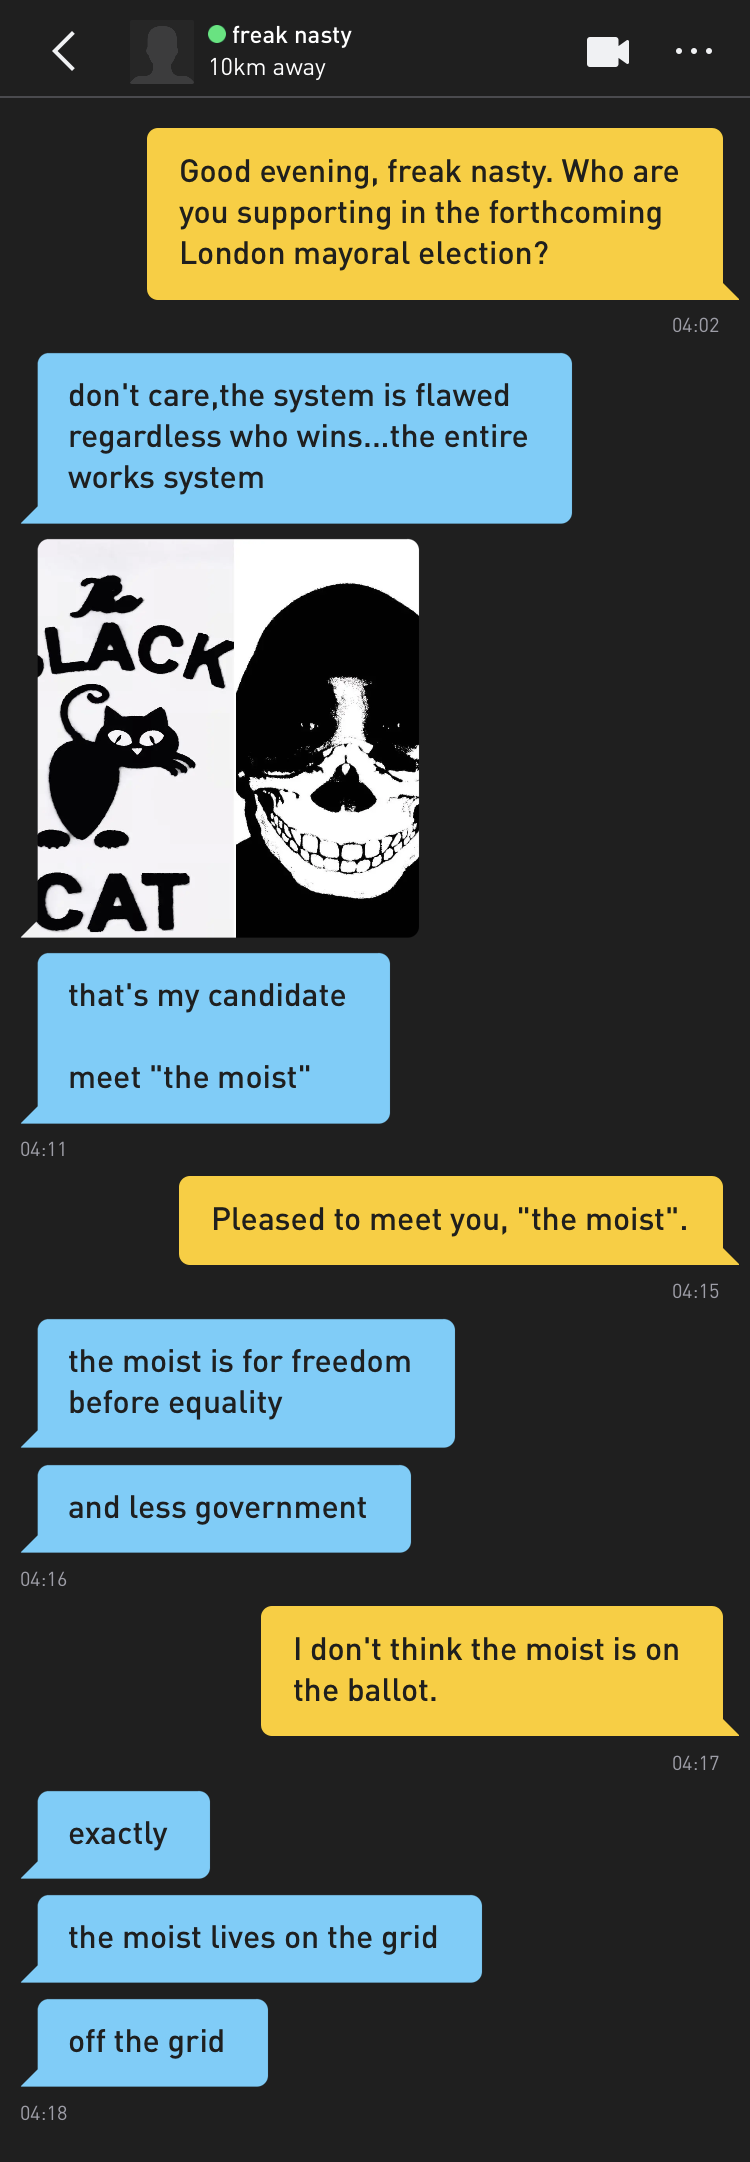 Me: Good evening, freak nasty. Who are you supporting in the forthcoming London mayoral election? freak nasty: don't care,the system is flawed regardless who wins...the entire works system freak nasty: [confusing and ominous image of what appears to be a cartoon cat next to a figure wearing a skull mask] freak nasty: that's my candidate meet "the moist" Me: Pleased to meet you, "the moist". freak nasty: the moist is for freedom before equality freak nasty: and less government Me: I don't think the moist is on the ballot. freak nasty: exactly freak nasty: the moist lives on the grid freak nasty: off the grid